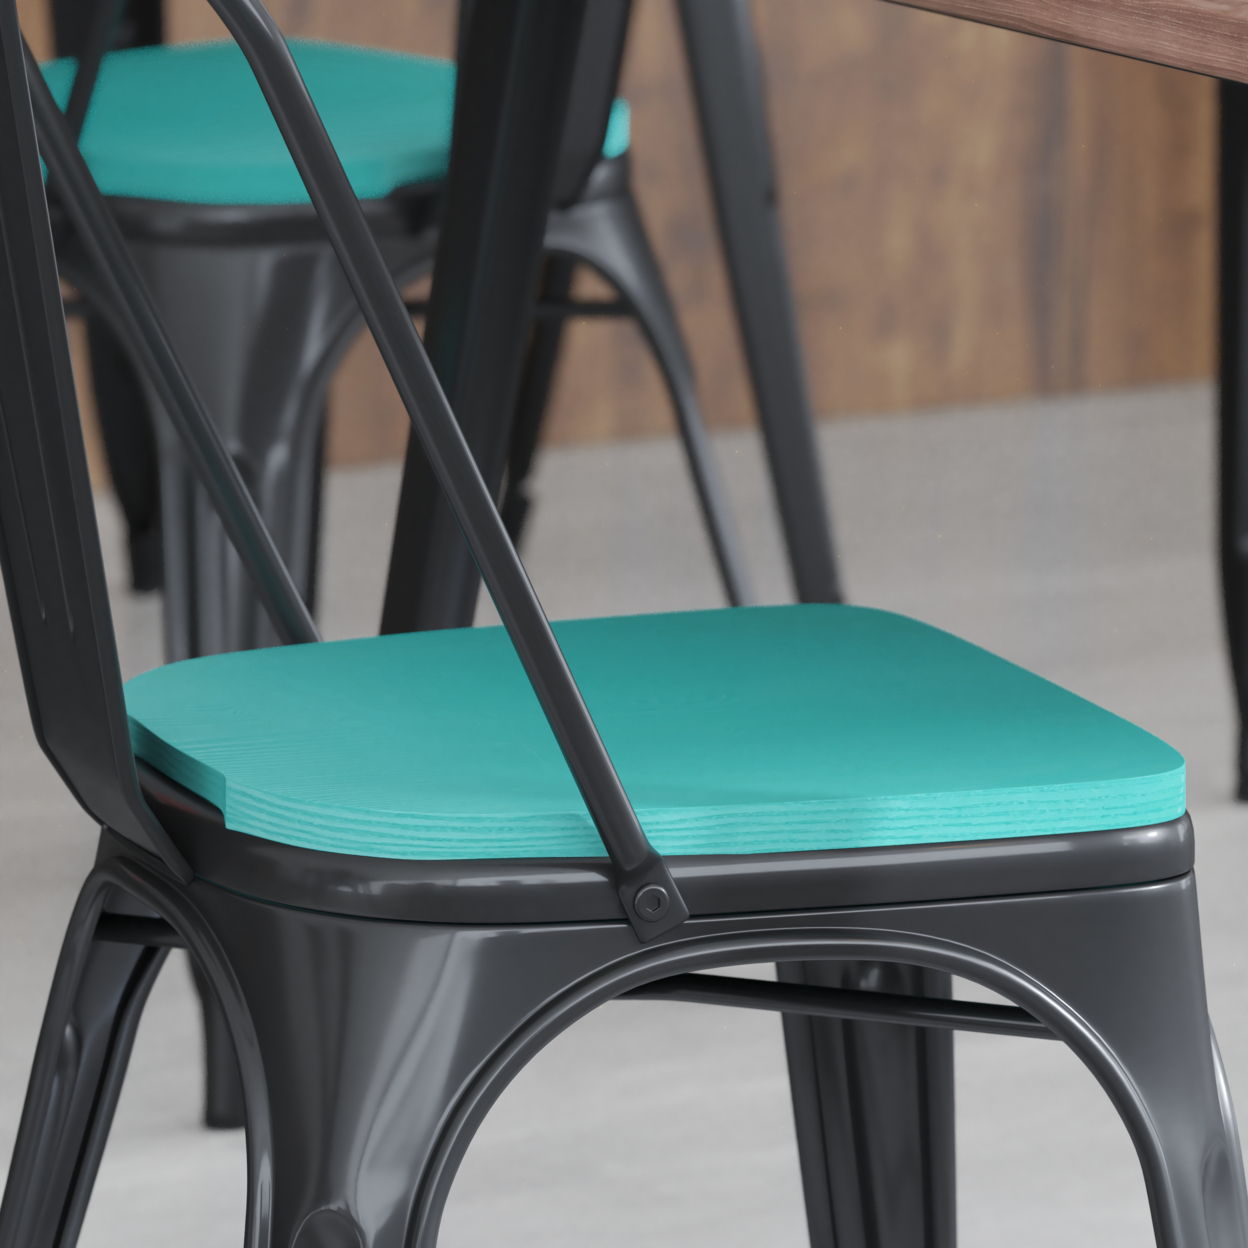 4 Piece Polyresin Chair Seats, Mint Blue